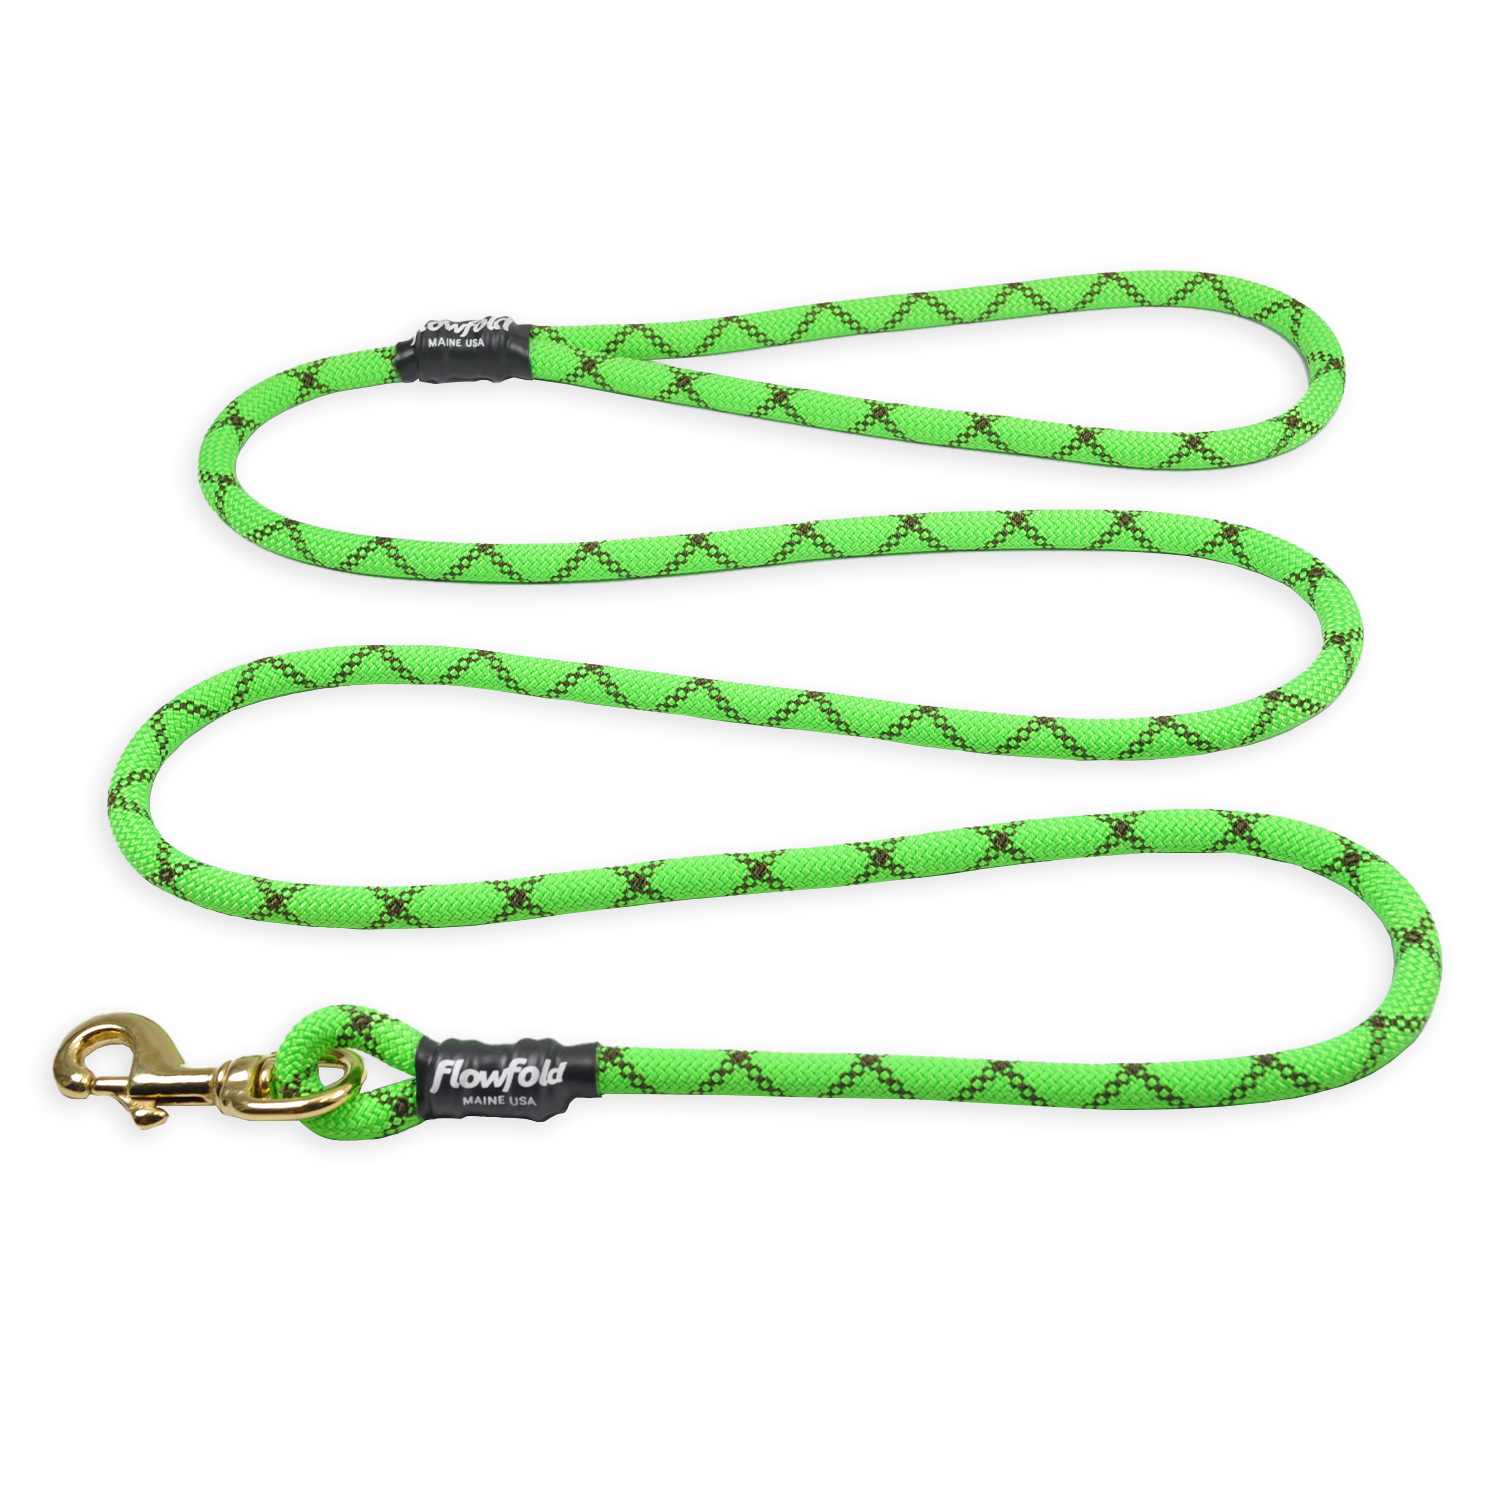 Flowfold Recycled Climbing Rope Dog Leash 6-Foot, Green Rope